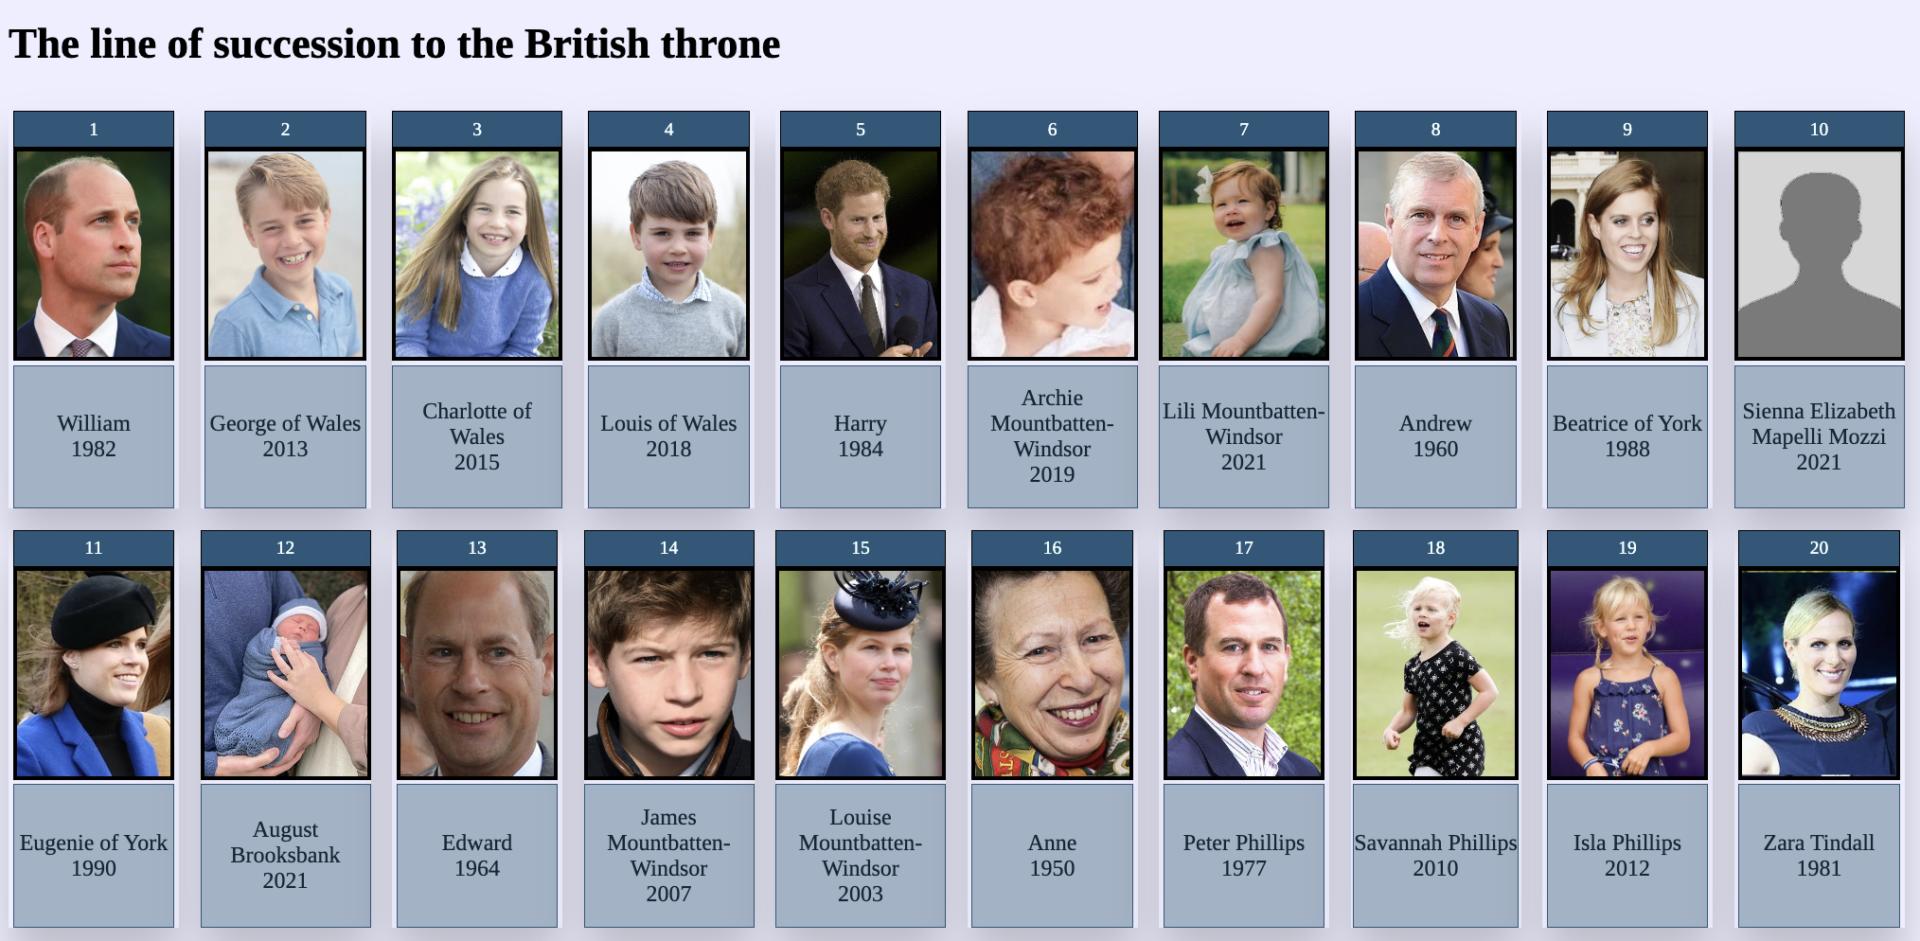 British Royal Family Tree - Guide to Queen Elizabeth II Windsor